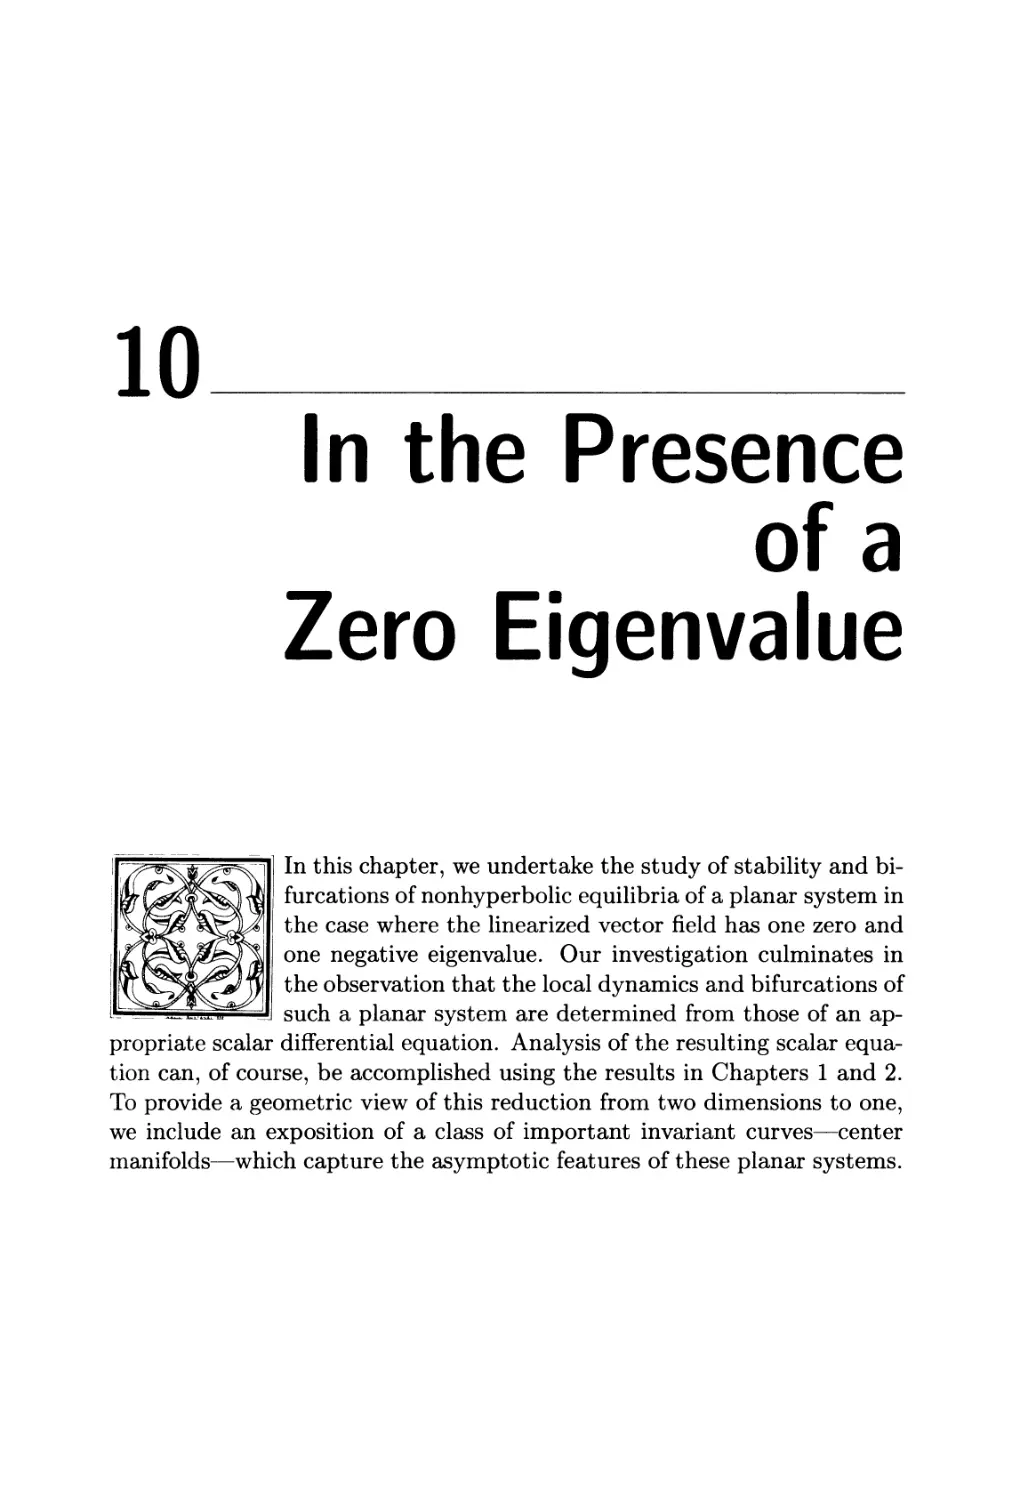 Chapter 10. In the Presence of a Zero Eigenvalue